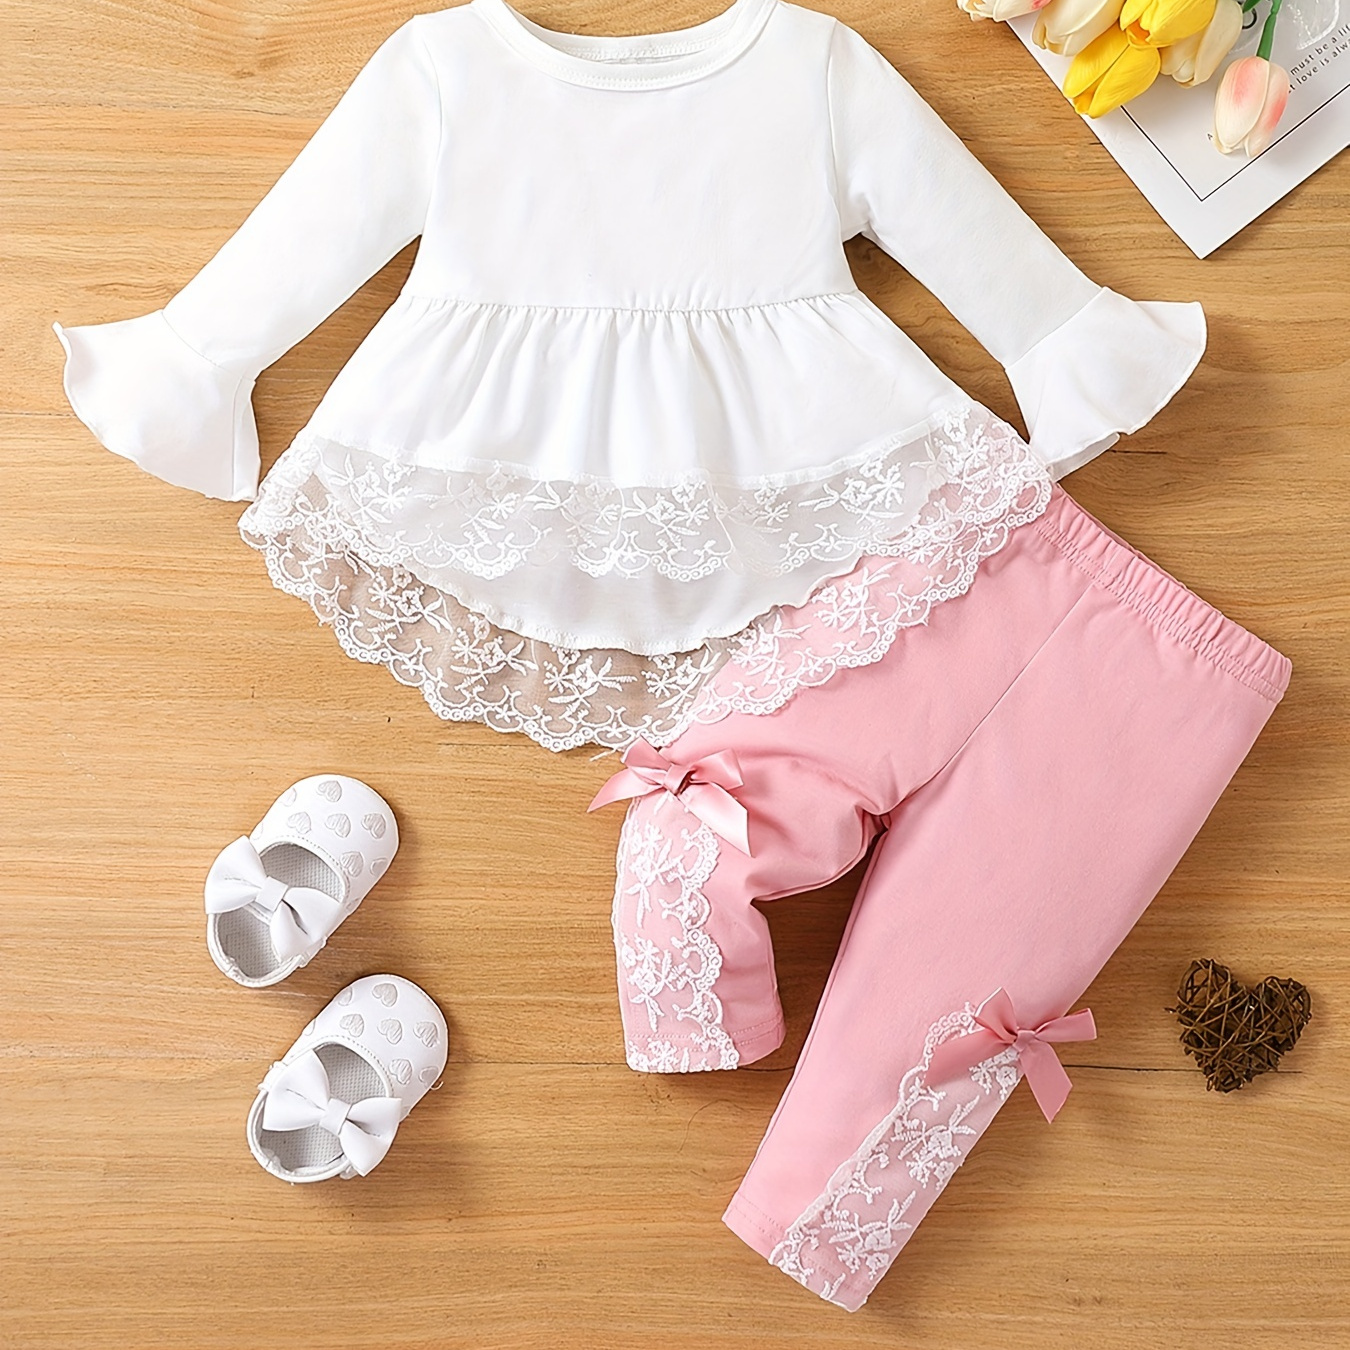 

Girls Sweet Lace Decor Irregular Hem Top With Flared Cuffs & Bowknot Pants Set, Toddler Baby's Outfits, Coquette Style